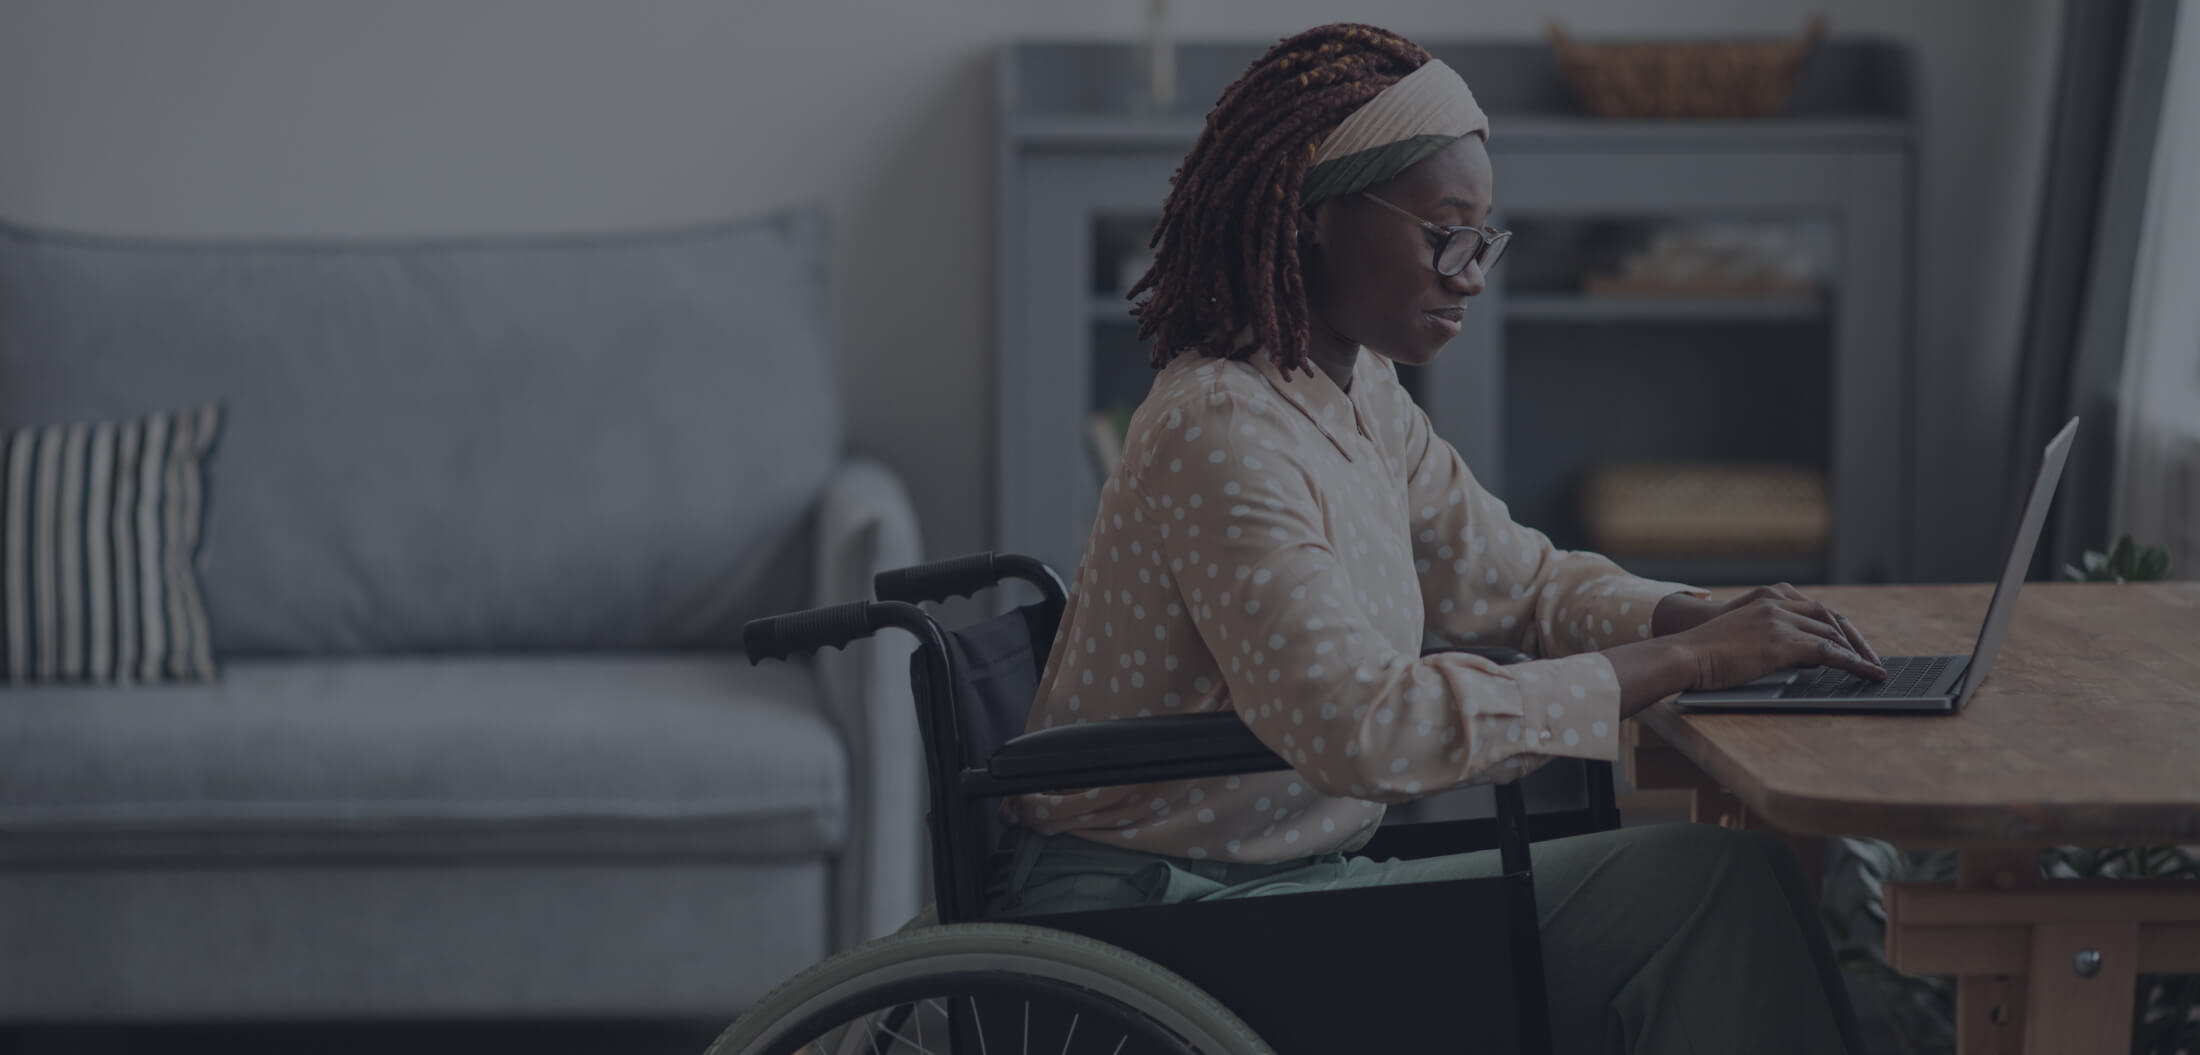  Accessible WordPress Themes: How Accessible Are They Really?